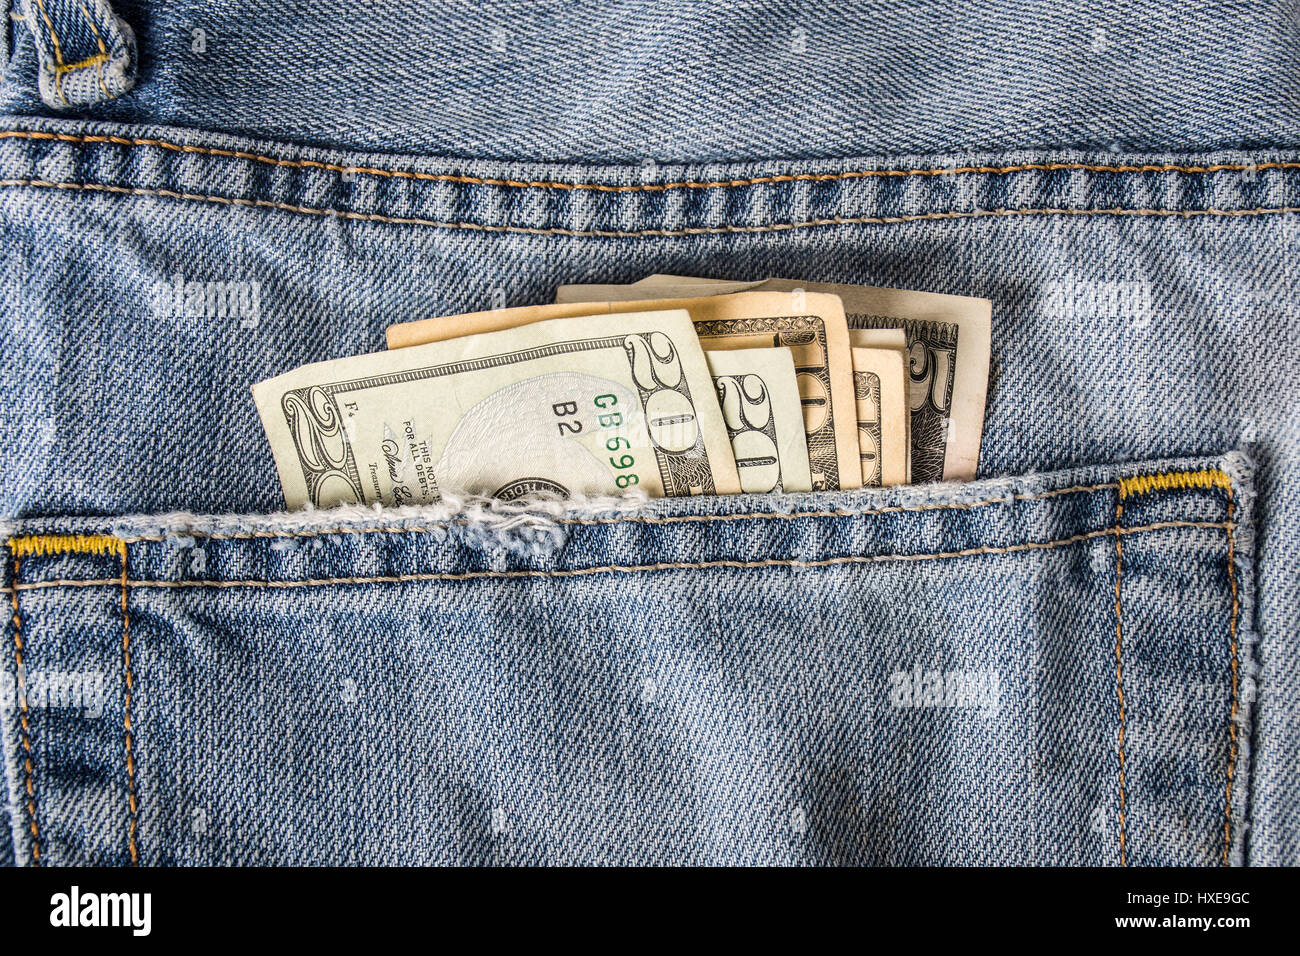 A back pocket of blue jeans showing american money fanned out. Stock Photo